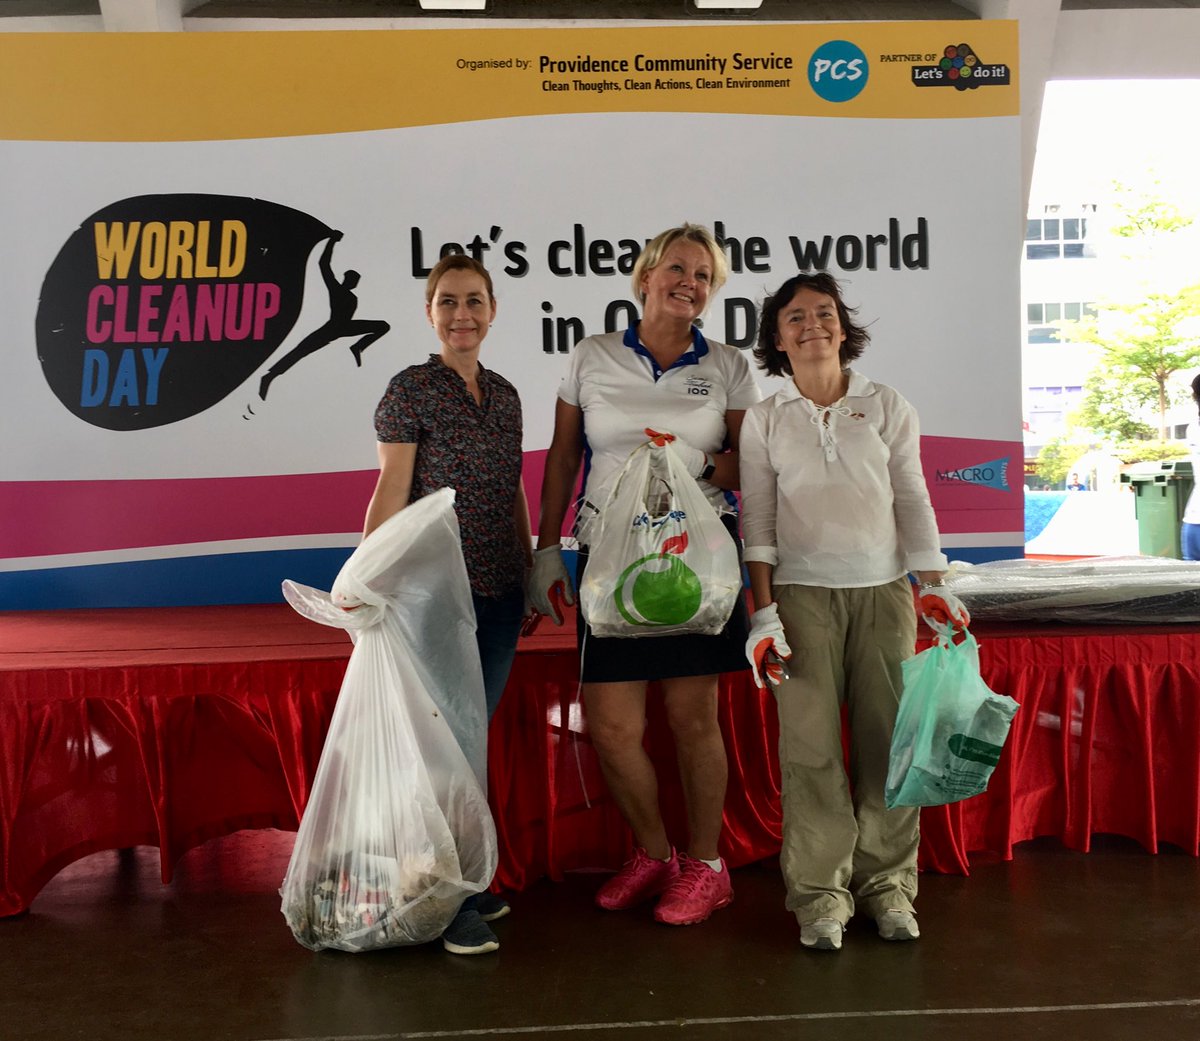 Excellent #NordicCooperation 🇩🇰🇫🇮🇳🇴 today at #WorldCleanUpDay in Singapore #WCDSG ⁦@DKAmbSG⁩ ⁦@paulaparviainen⁩